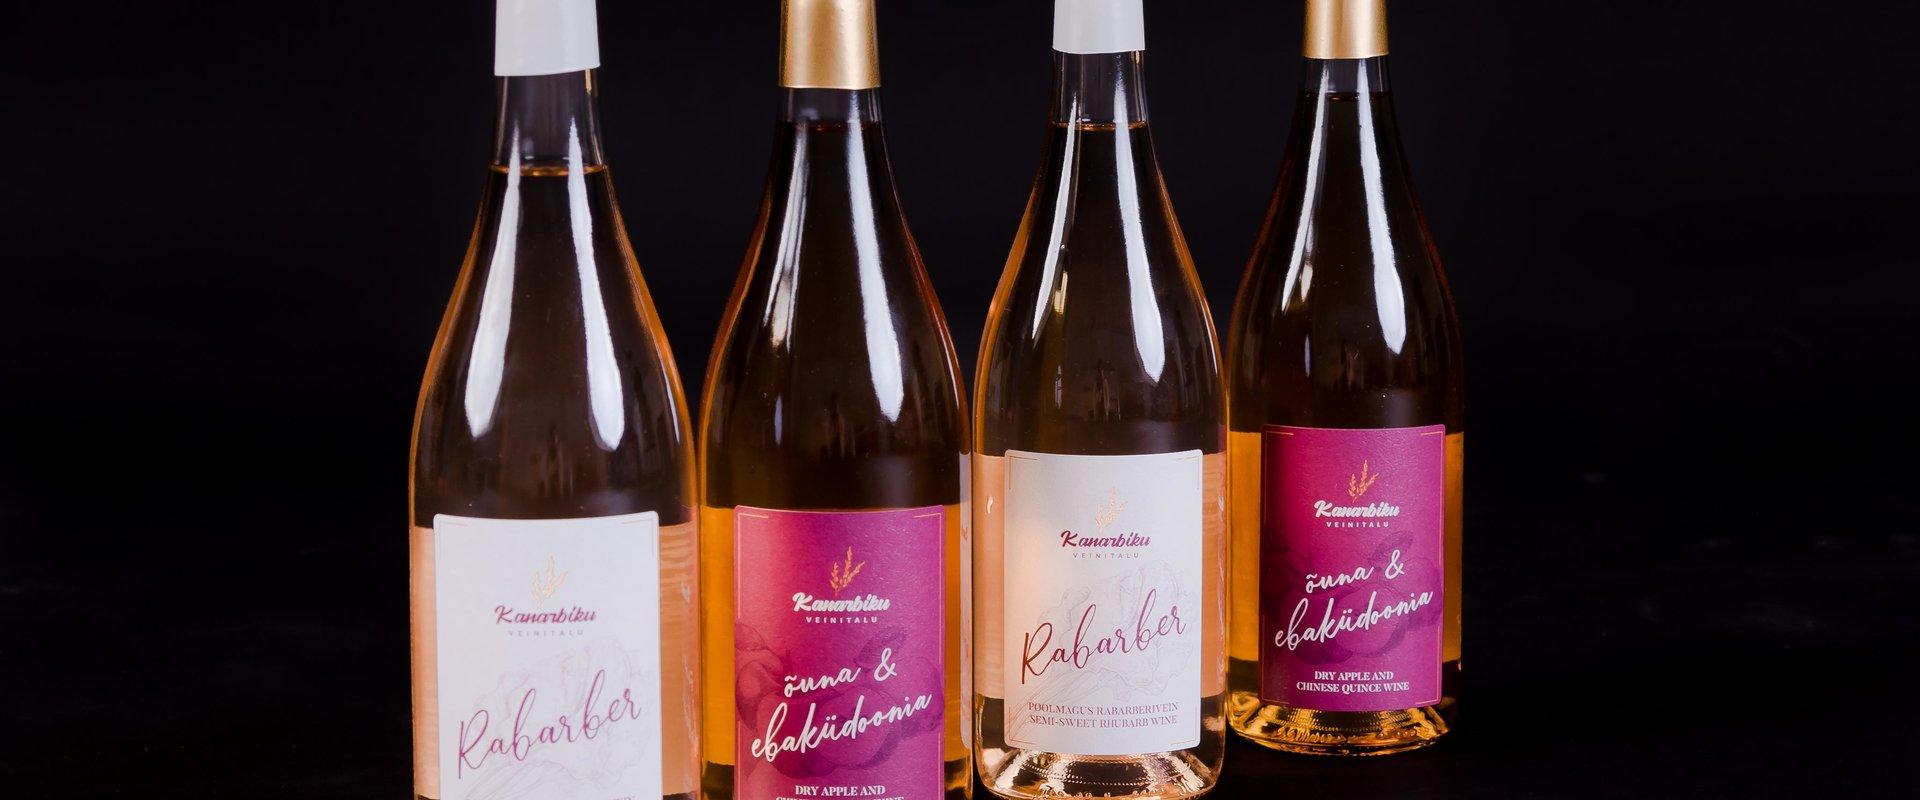 Kanarbiku Veinitalu OÜ is a company established in 2018 whose main activity is the production of fruit and berry wines as well as juice. Only the best